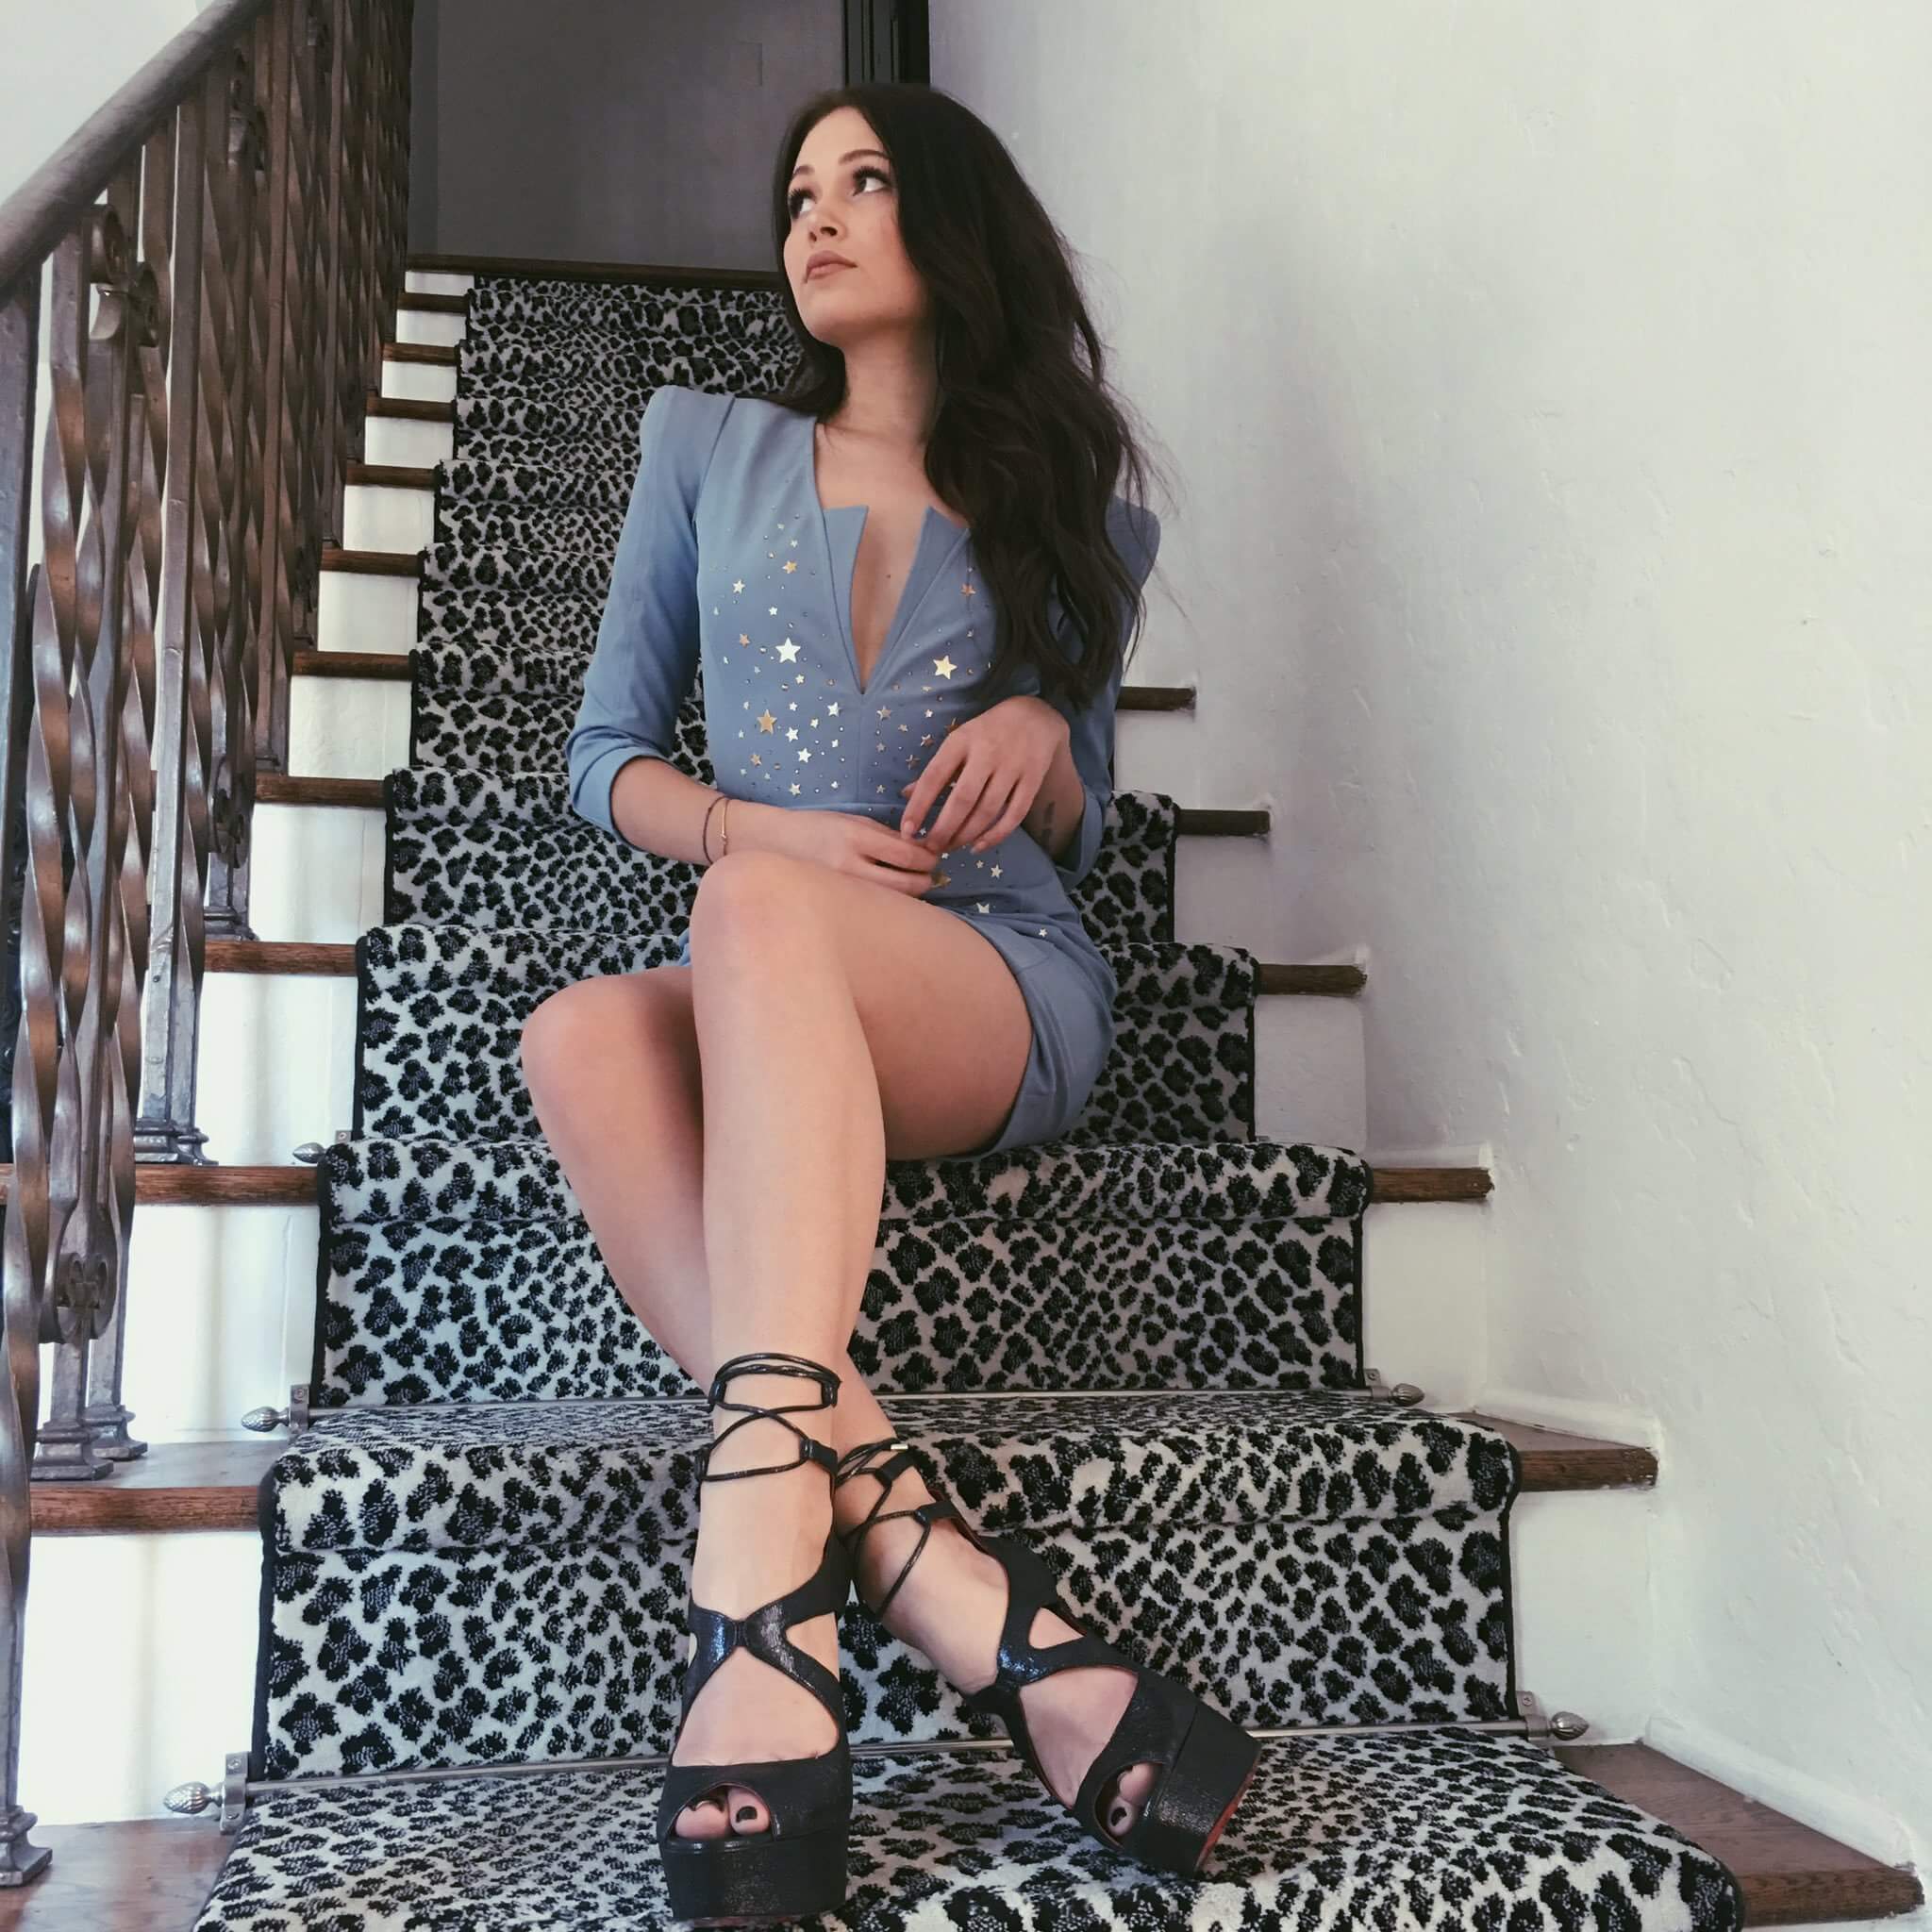 49 Sexy Kelli Berglund Feet Pictures Will Get You All Sweating | Best Of Comic Books